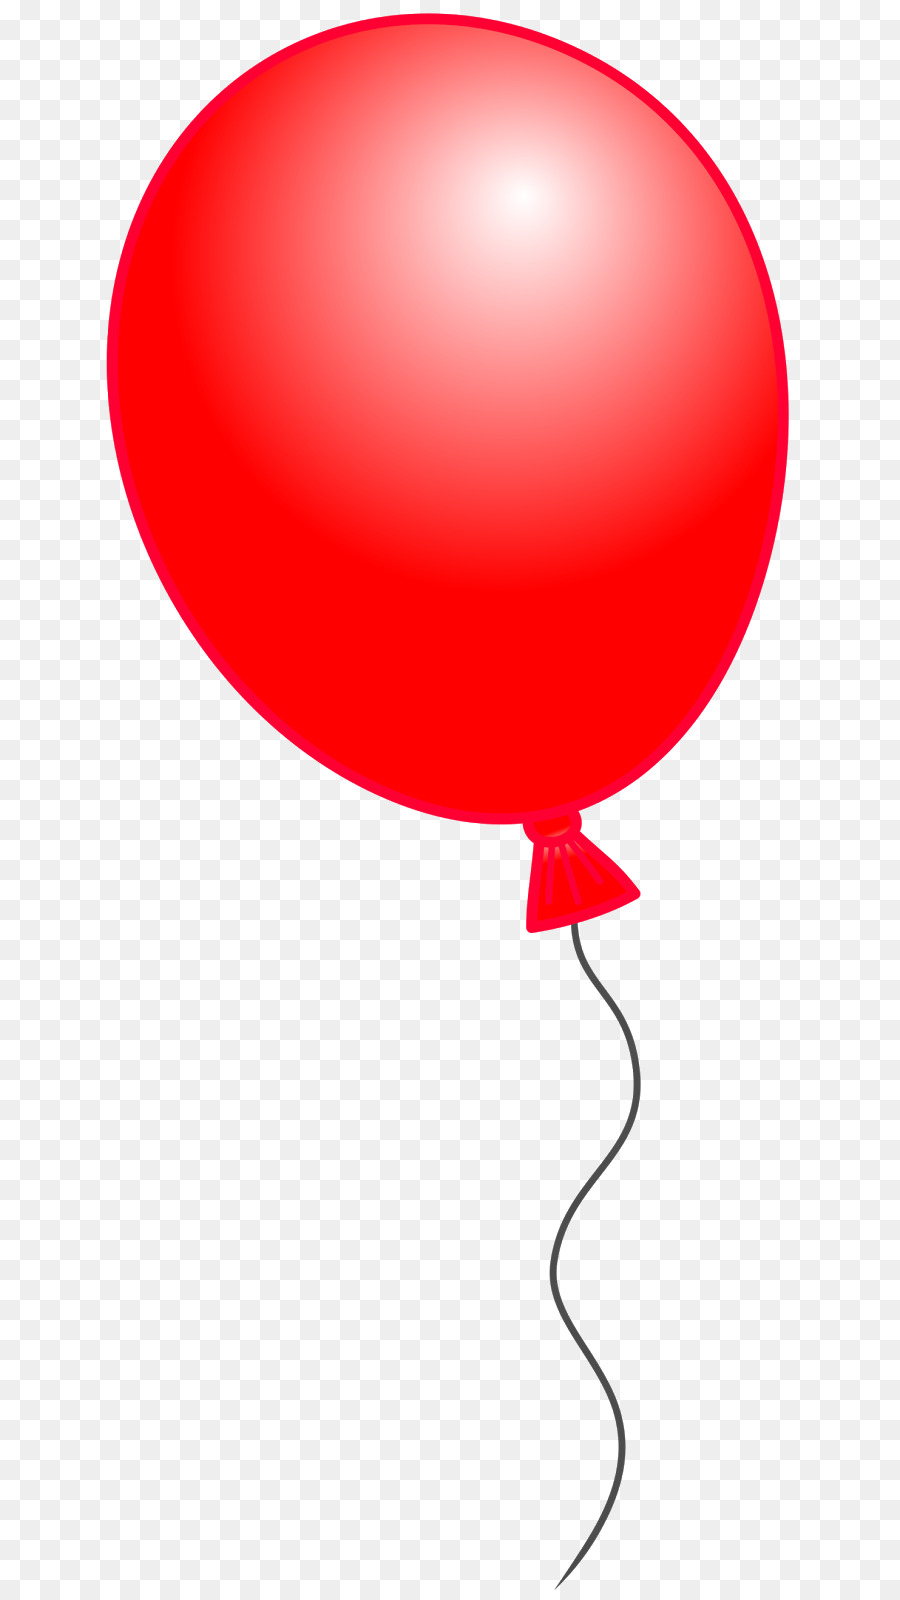 Balloon Clip art - balloons png download - 724*1600 - Free Transparent Balloon png Download.